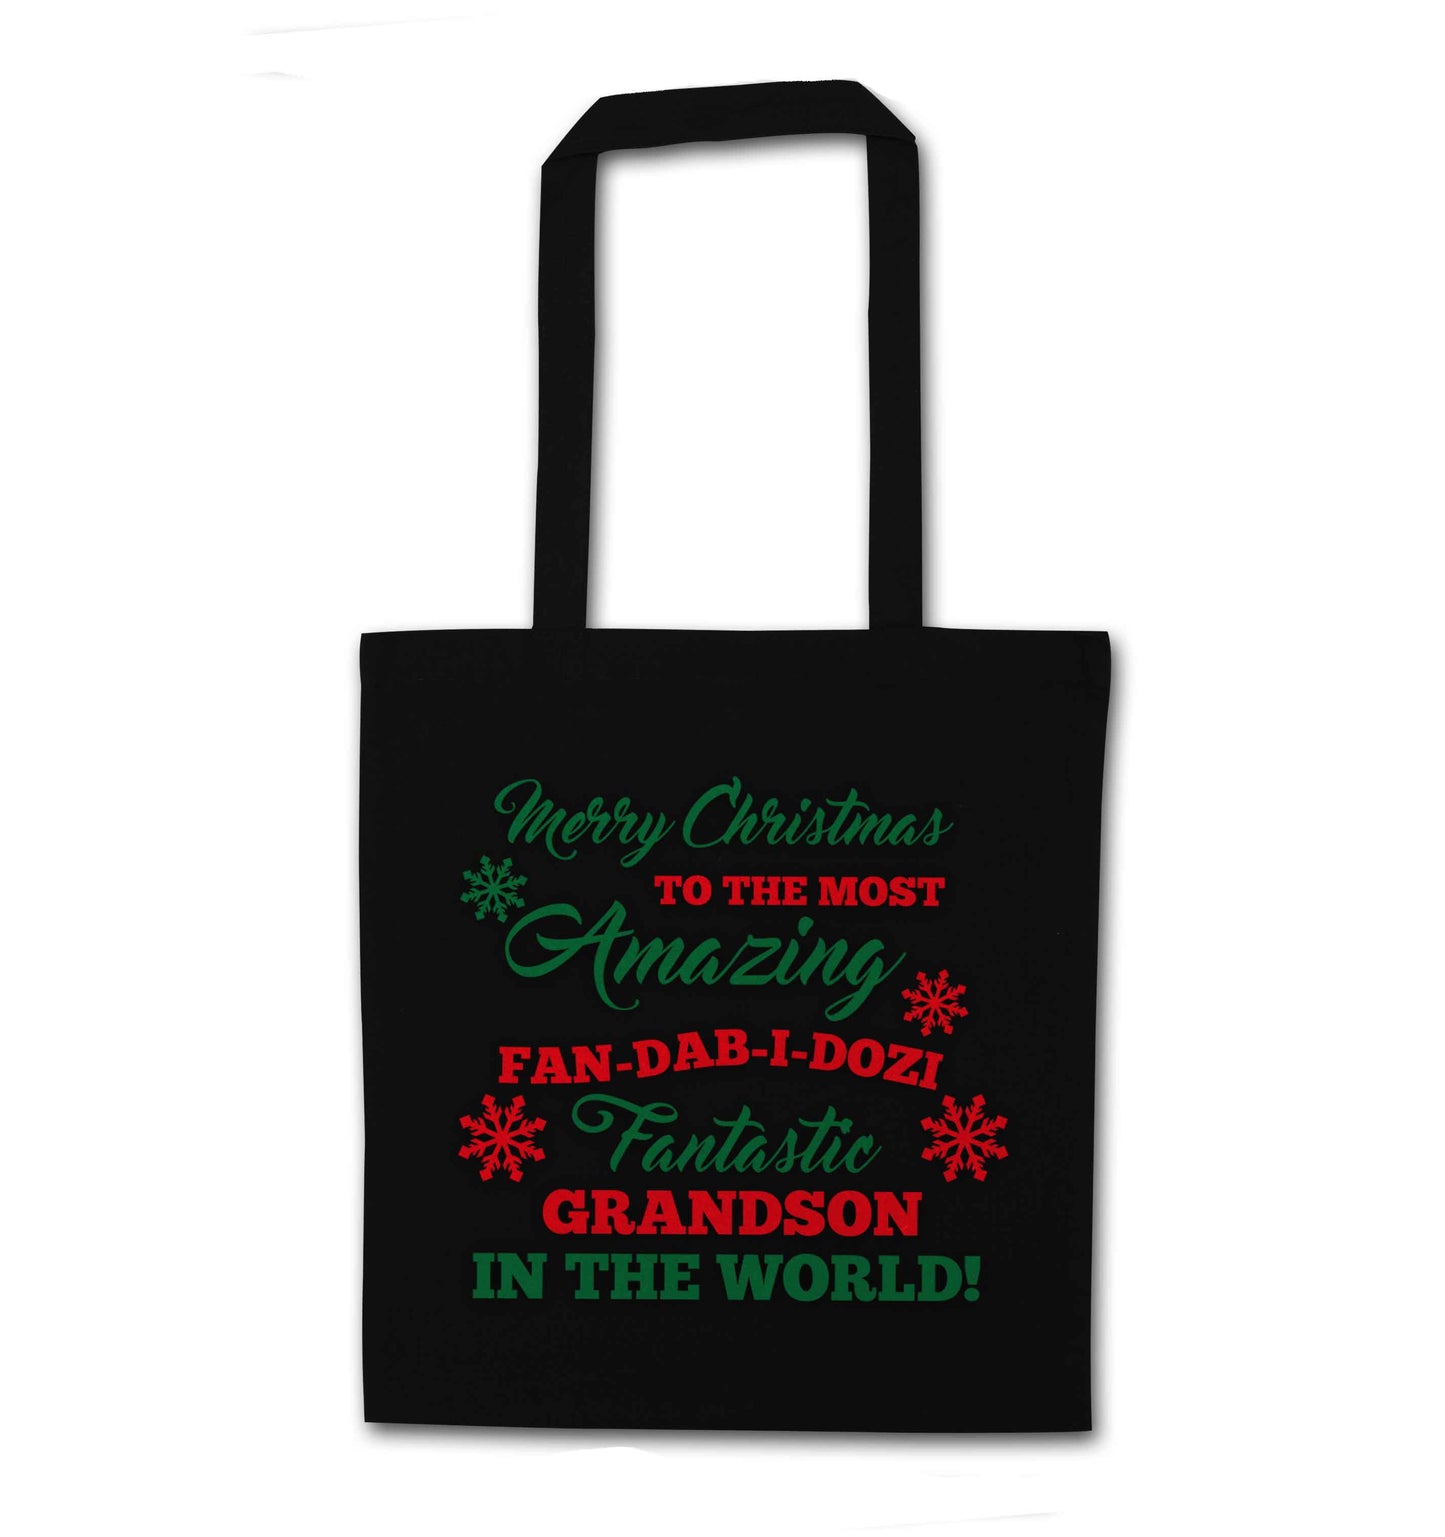 Merry Christmas to the most amazing fan-dab-i-dozi fantasic Grandson in the world black tote bag